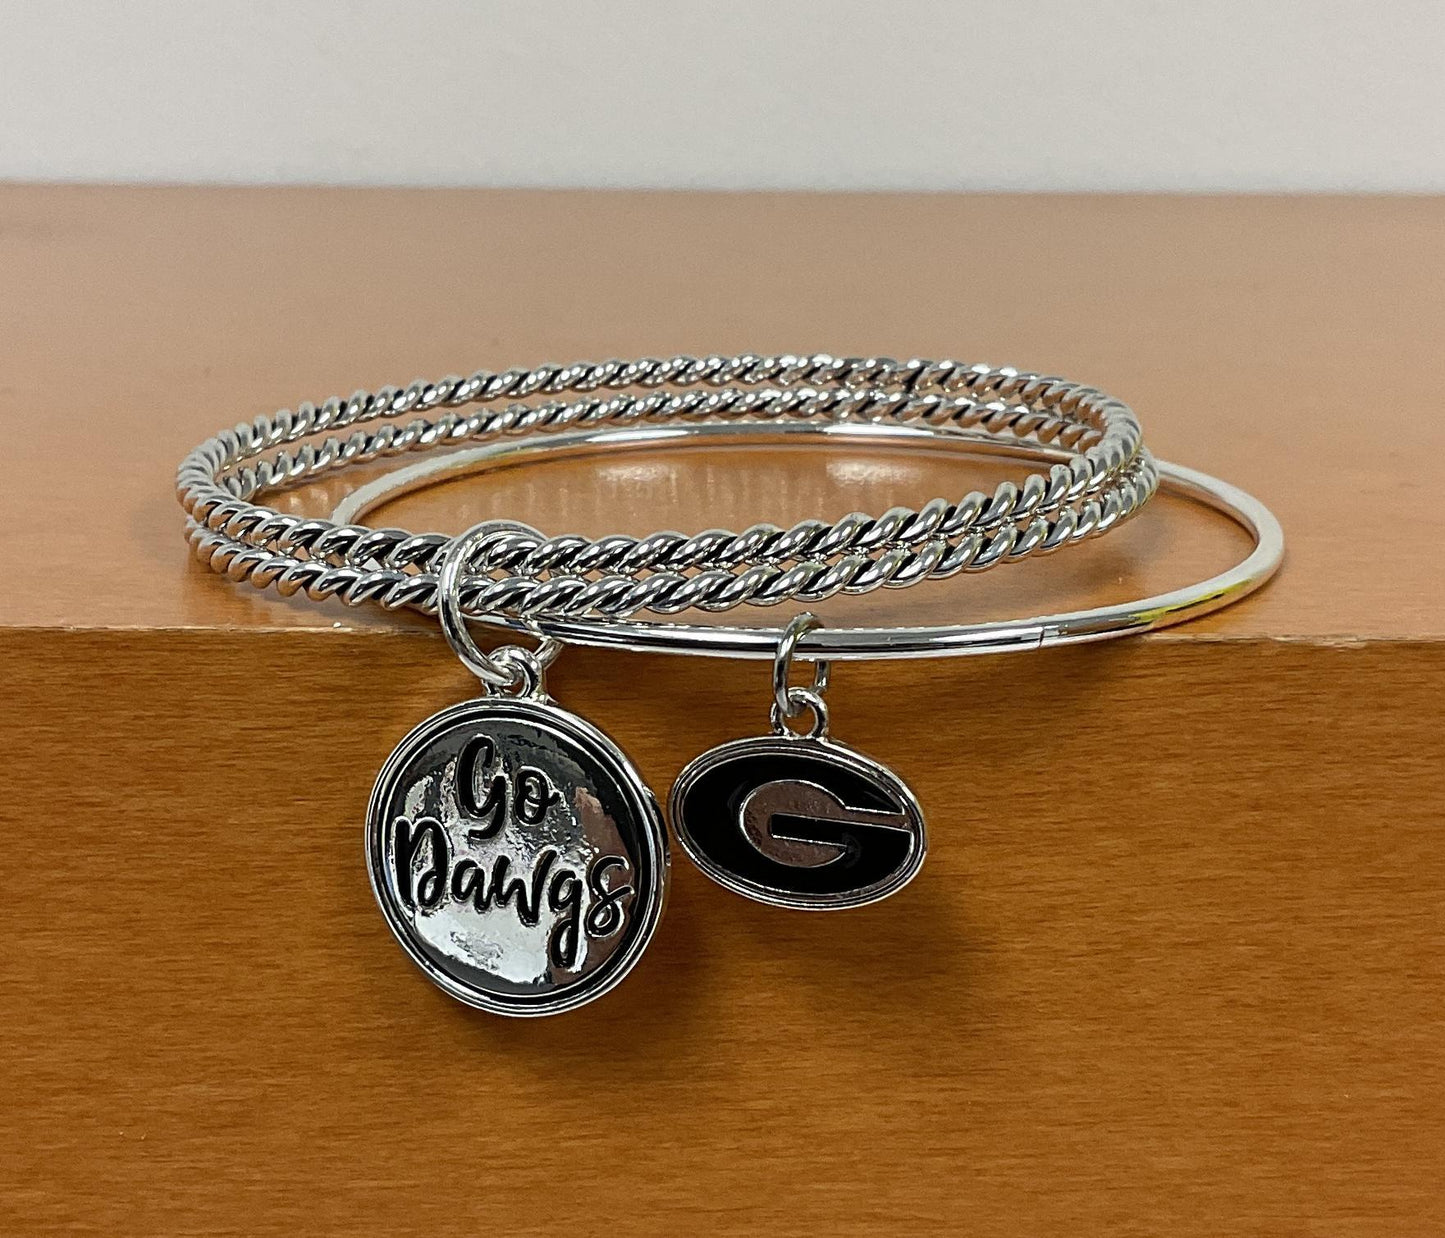 From The Heart UGA Twist and Shout Bracelet